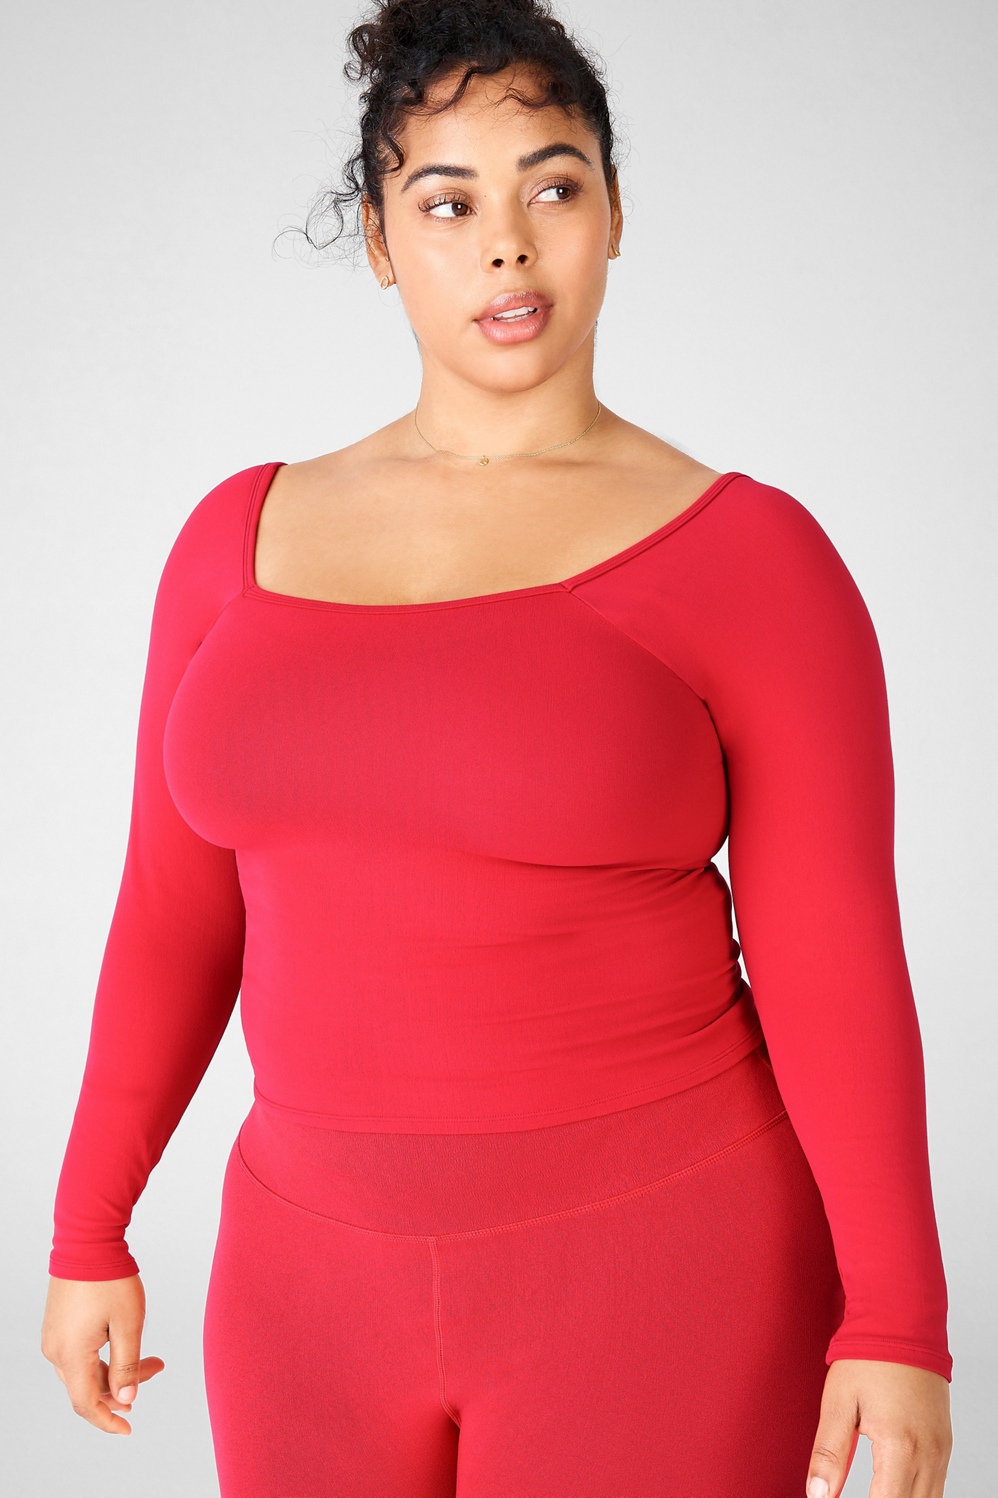 Women's Fabletics Emilia Top Size Large Long Sleeve Red Croptop